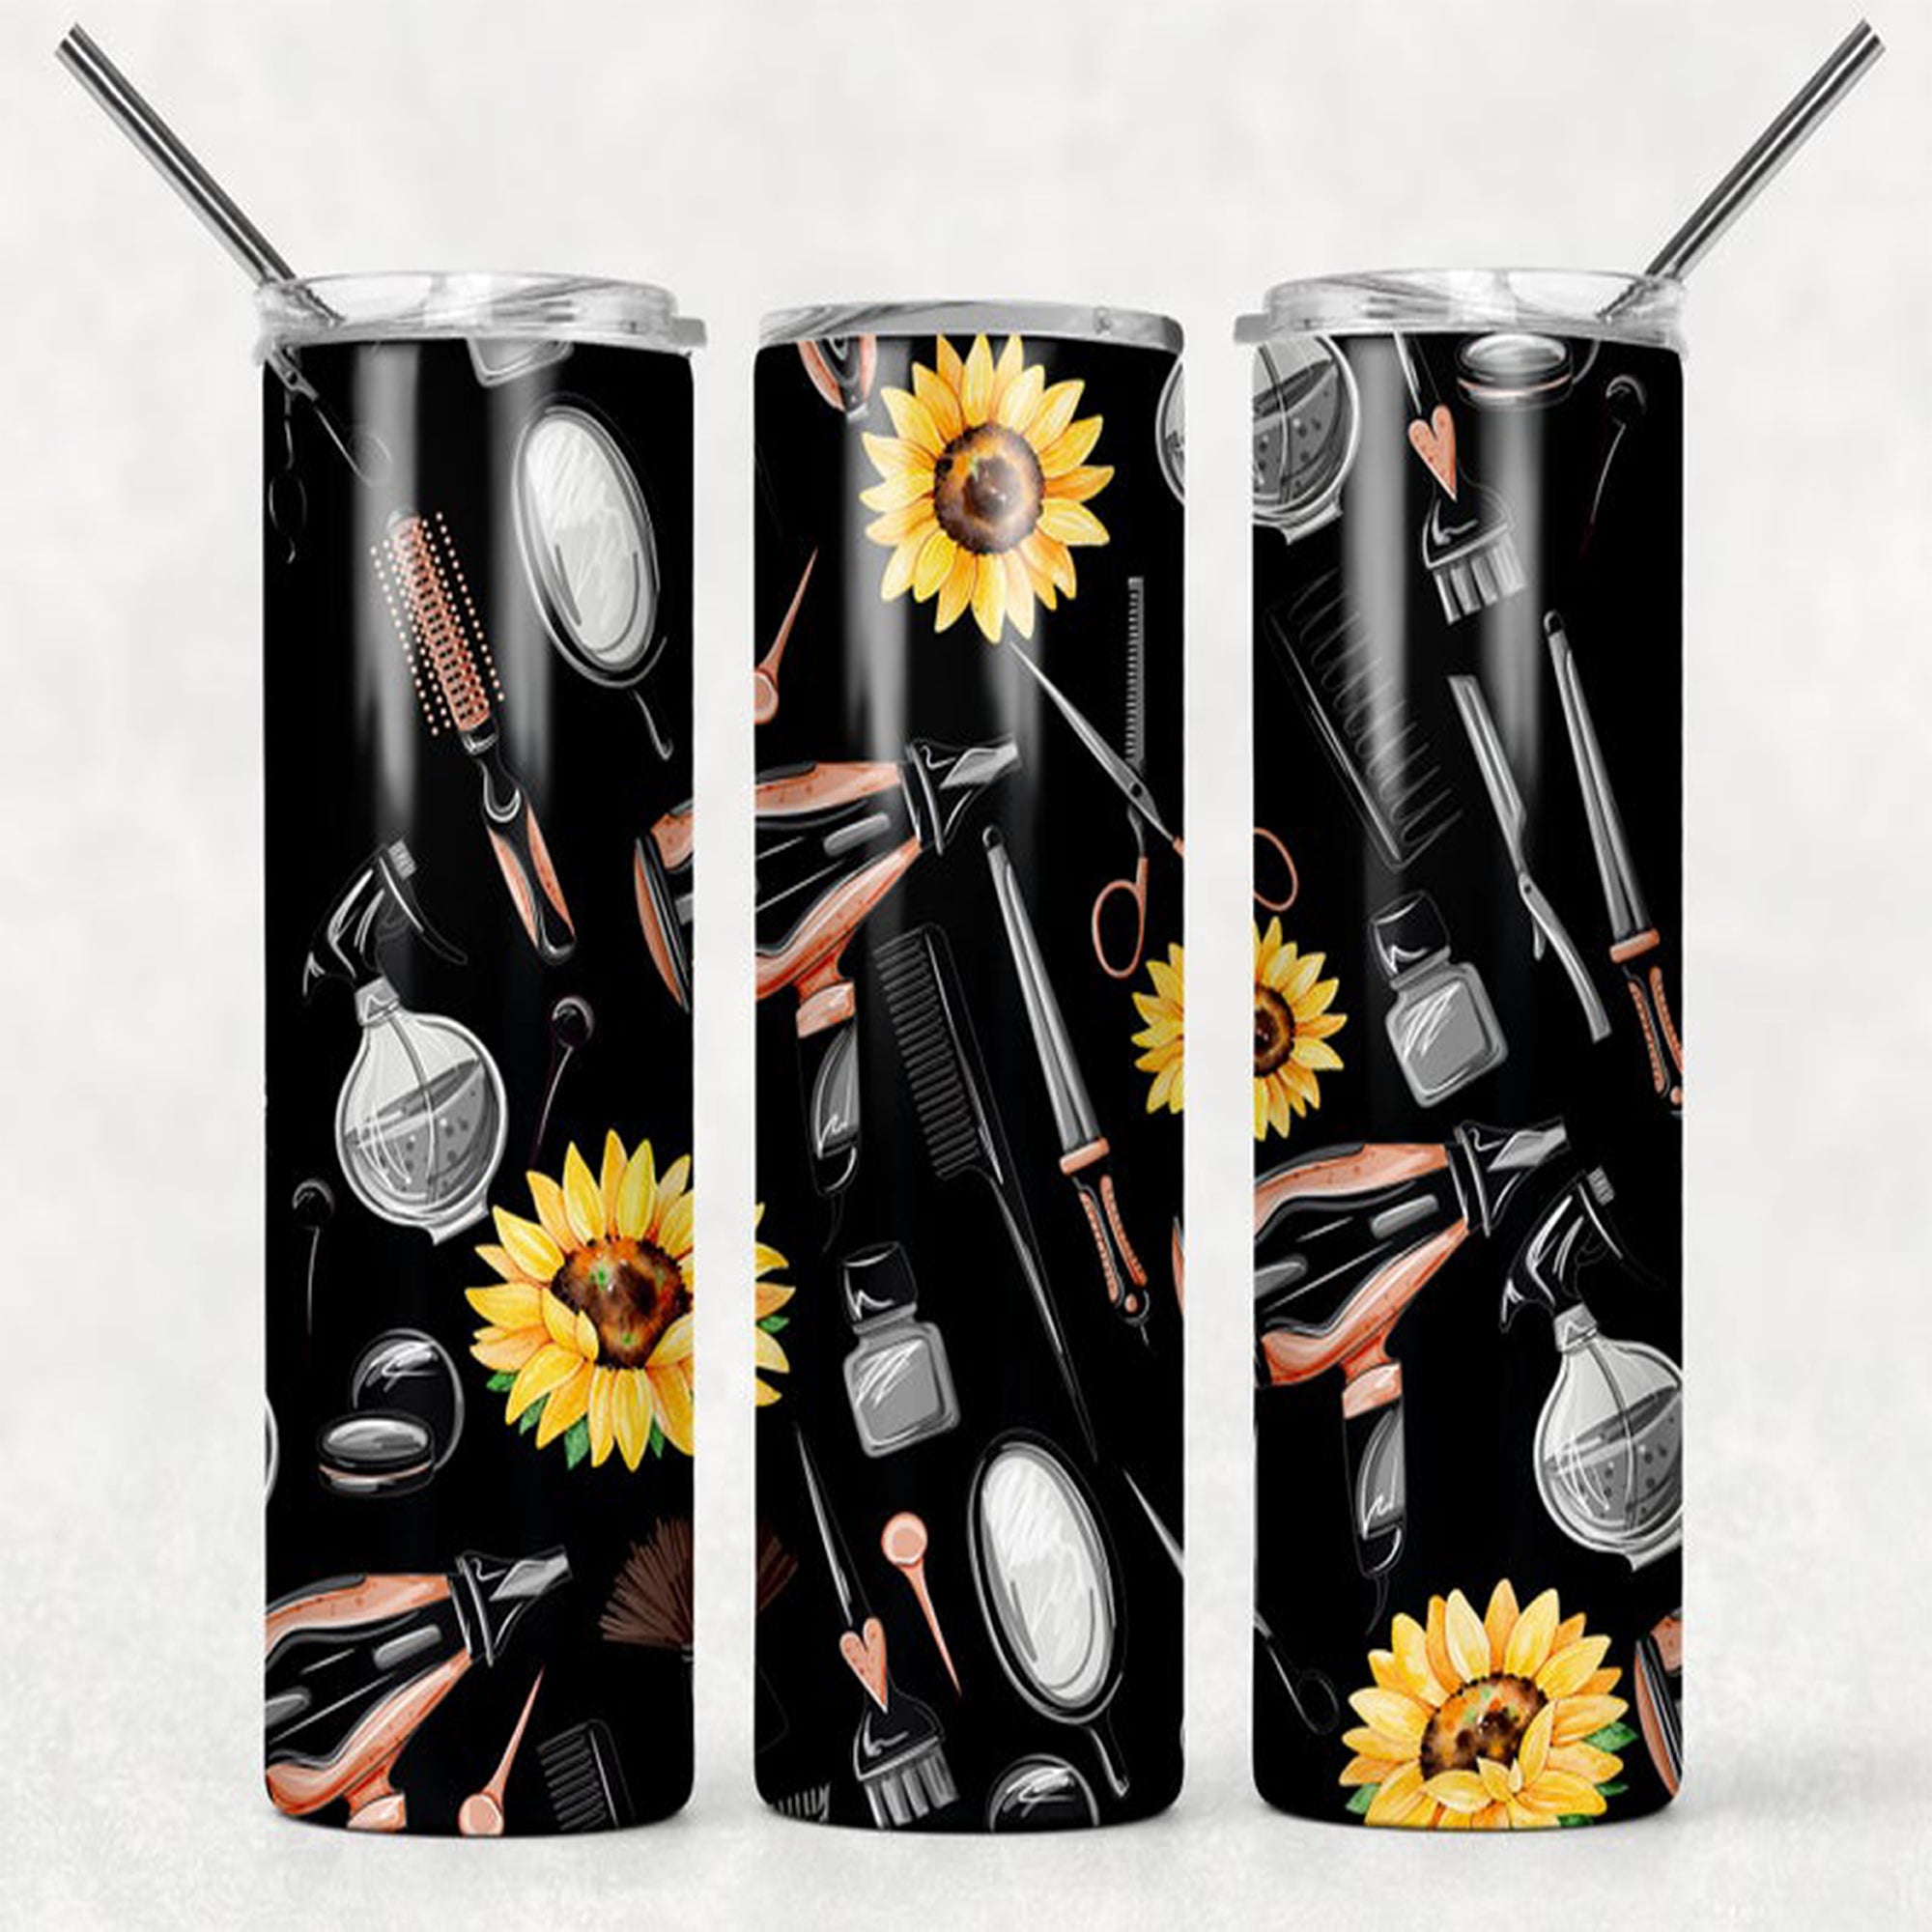 Hair Styling Tools With Sunflowers Skinny Tumbler